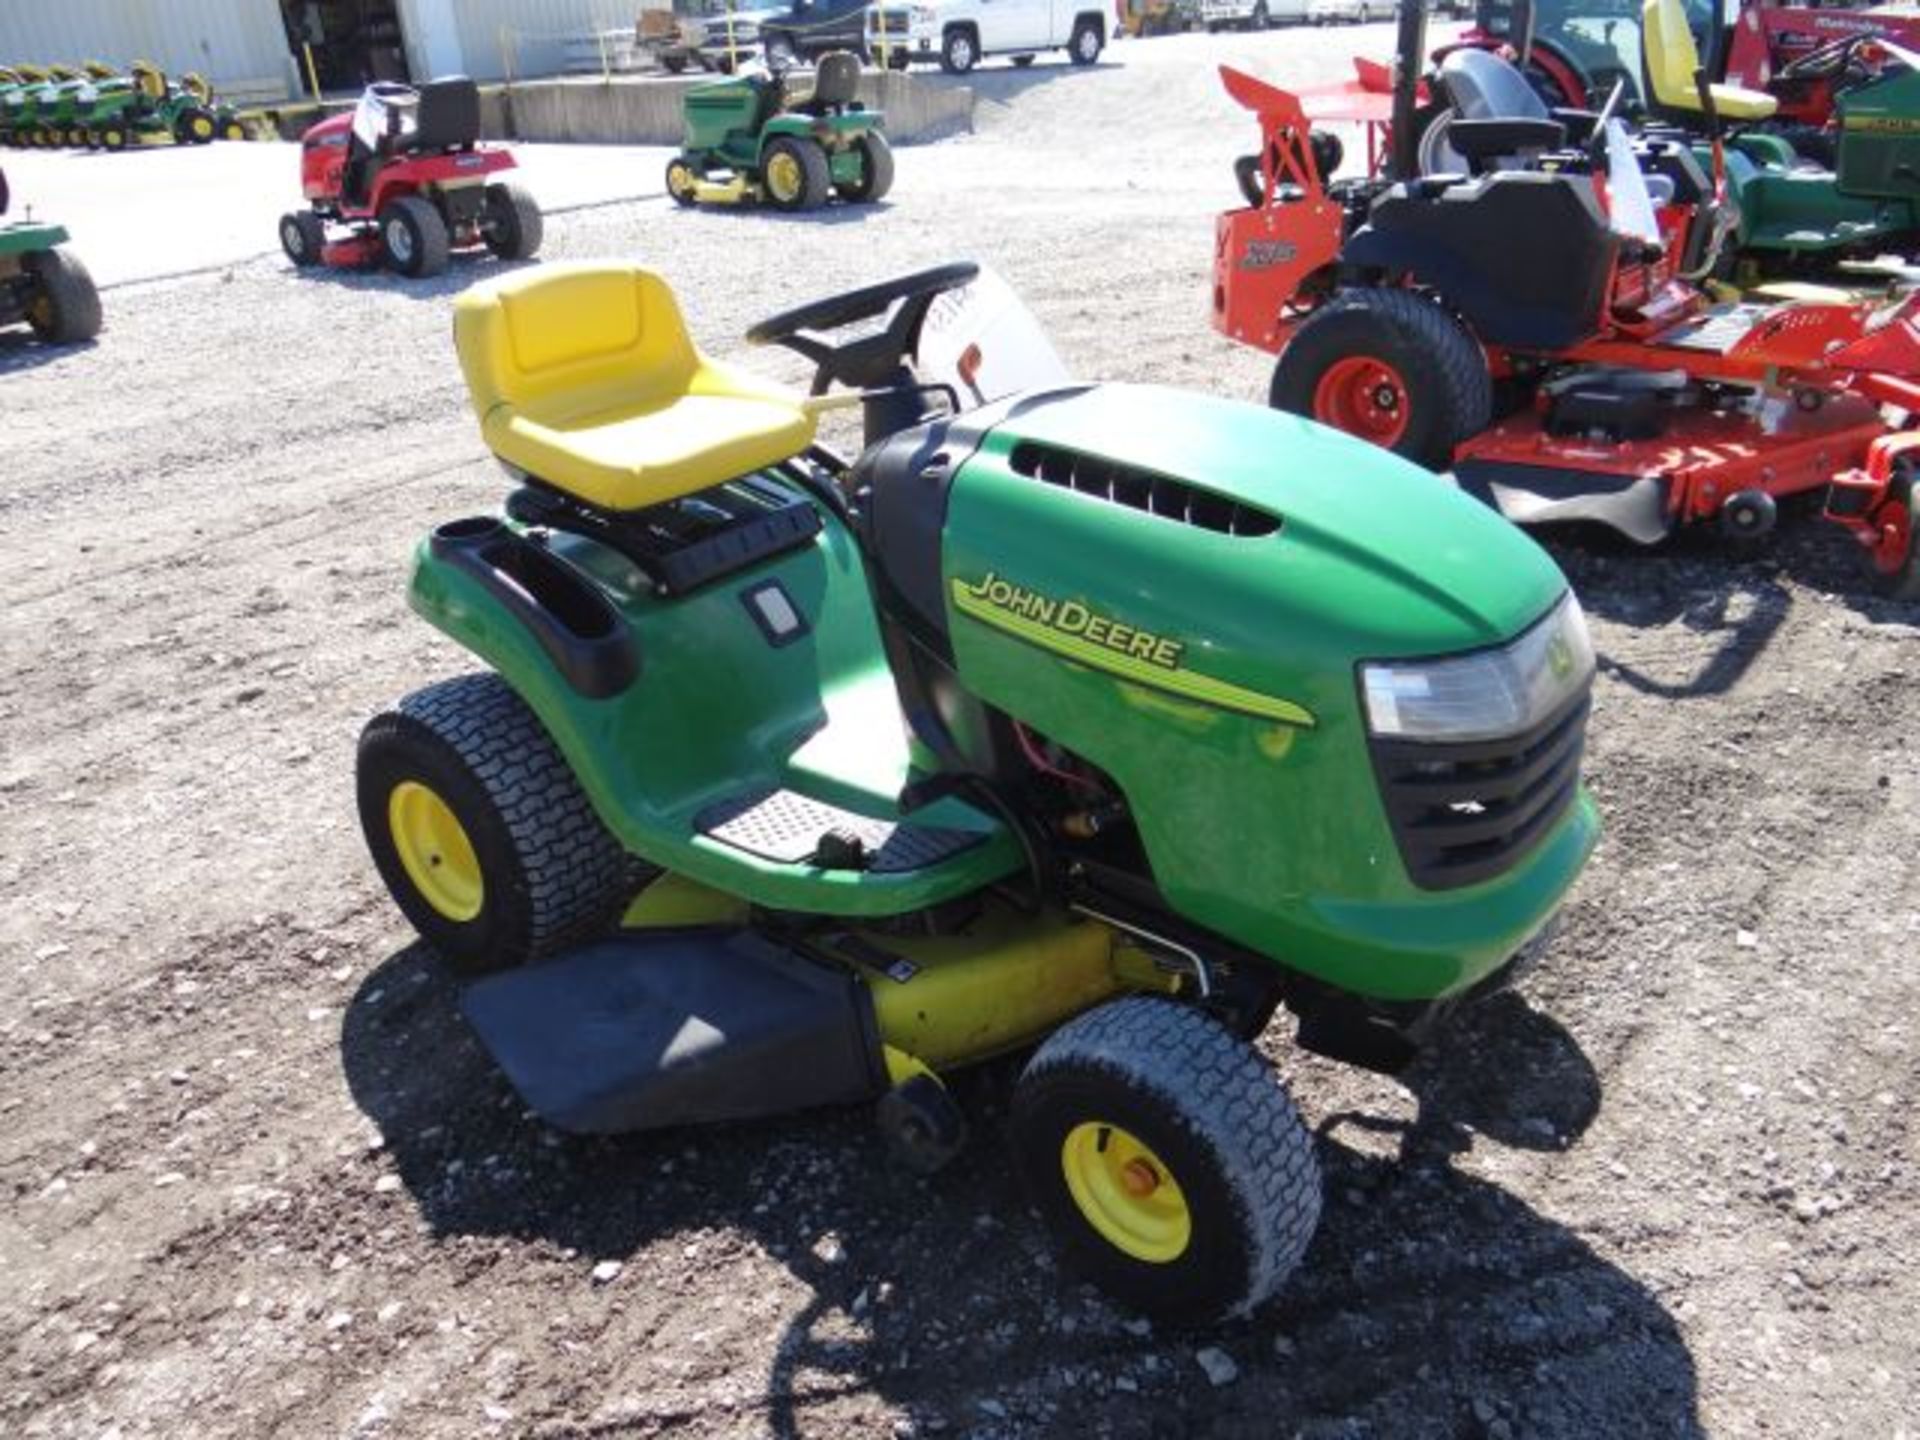 Lot 84153 - 2004 JD L110/42 Mower 187 hrs, 17.5hp, Kohler, Single, Air Cooled, Hydro, Not - Image 3 of 4